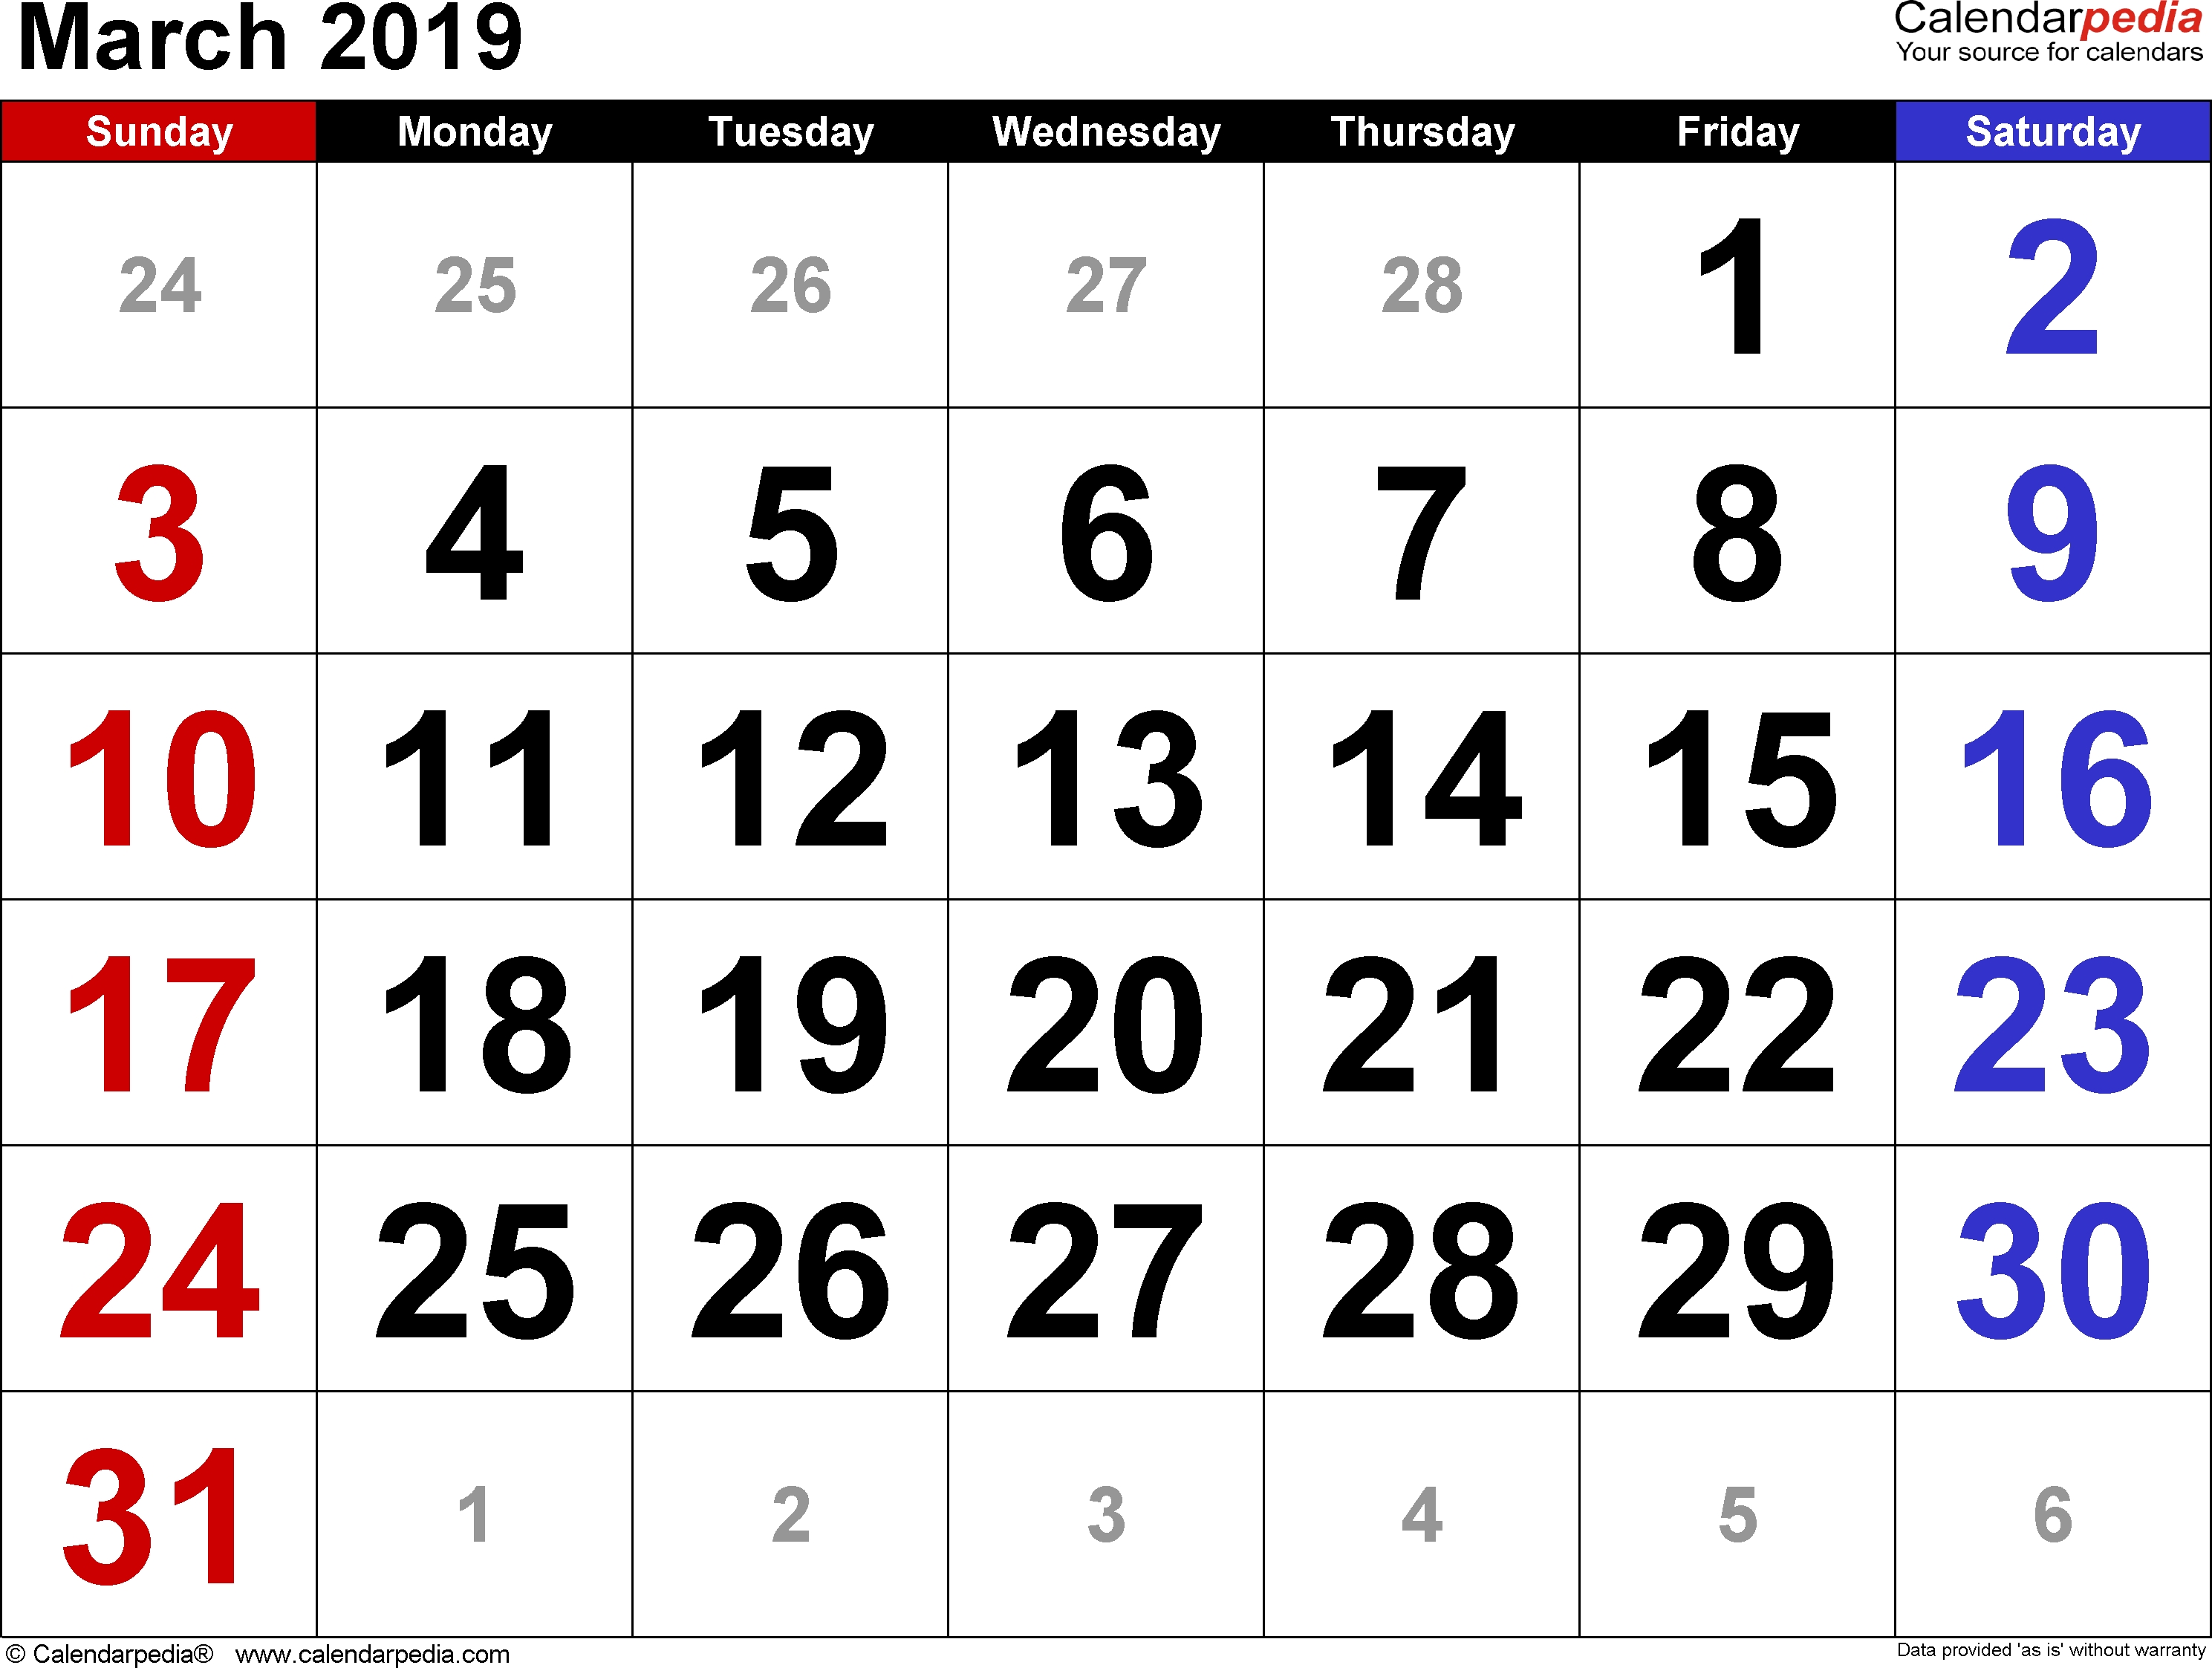 March 2019 - Calendar Templates For Word, Excel And Pdf Free Printablle Calendarwith Us Holidays And 1 Omth Preceding And 1 Following